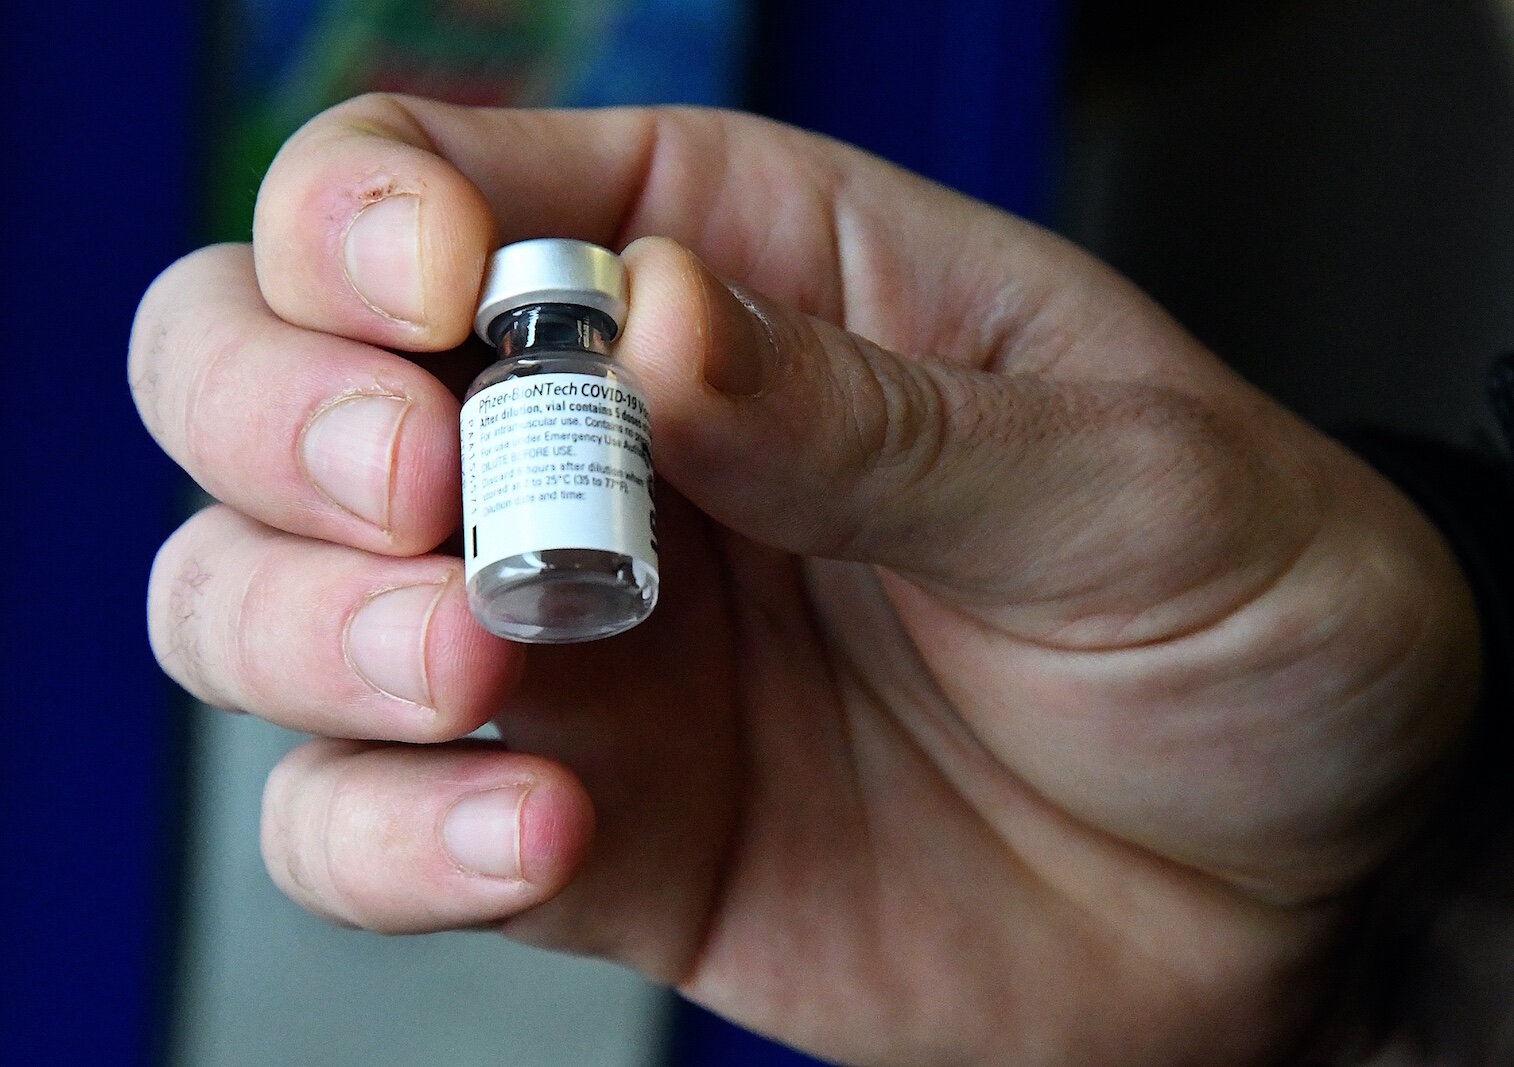  A vial which contains a dose of the Pfizer/BioNTech COVID 19 vaccine. 